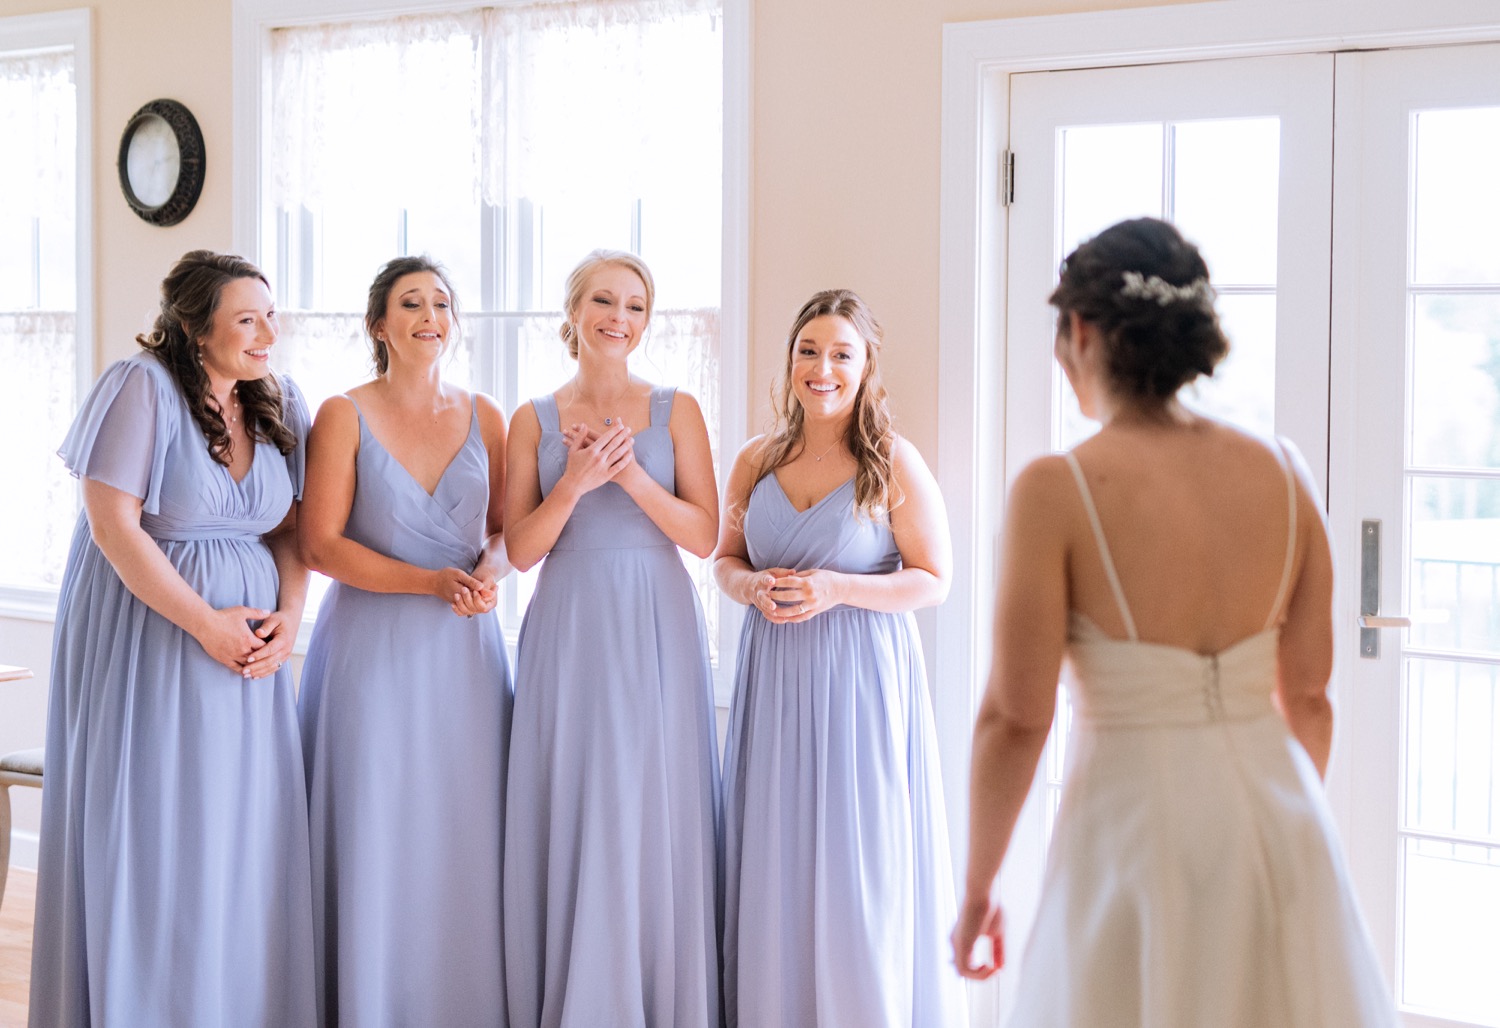 Bride's first look with her bridesmaids before her wedding ceremony